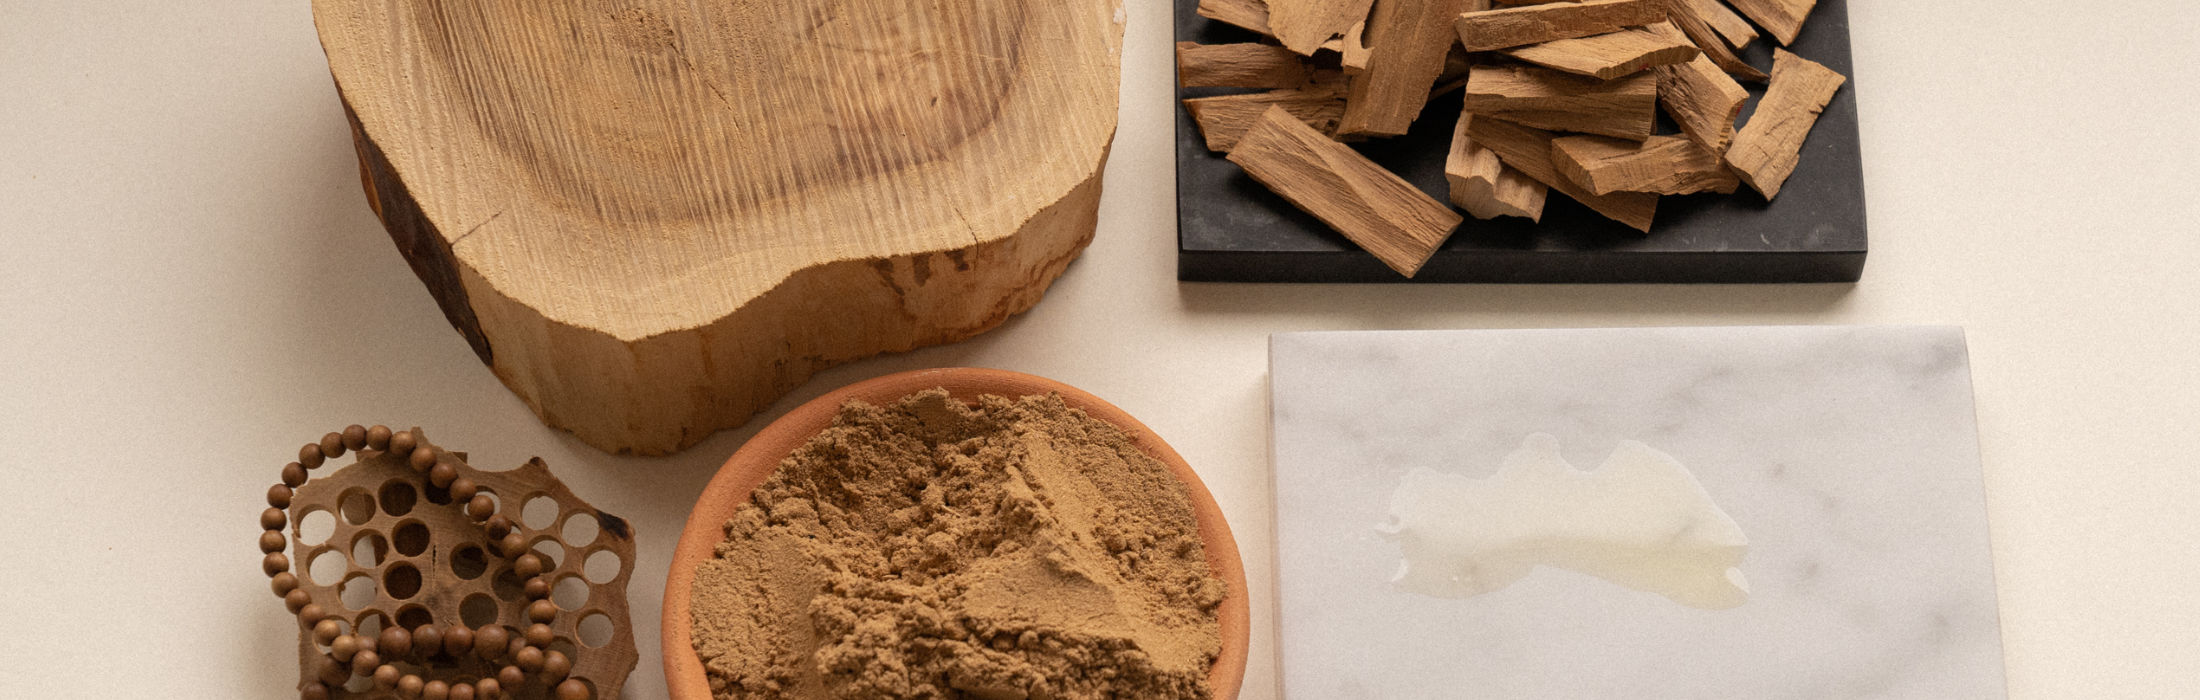 The benefits of Sandalwood products banner